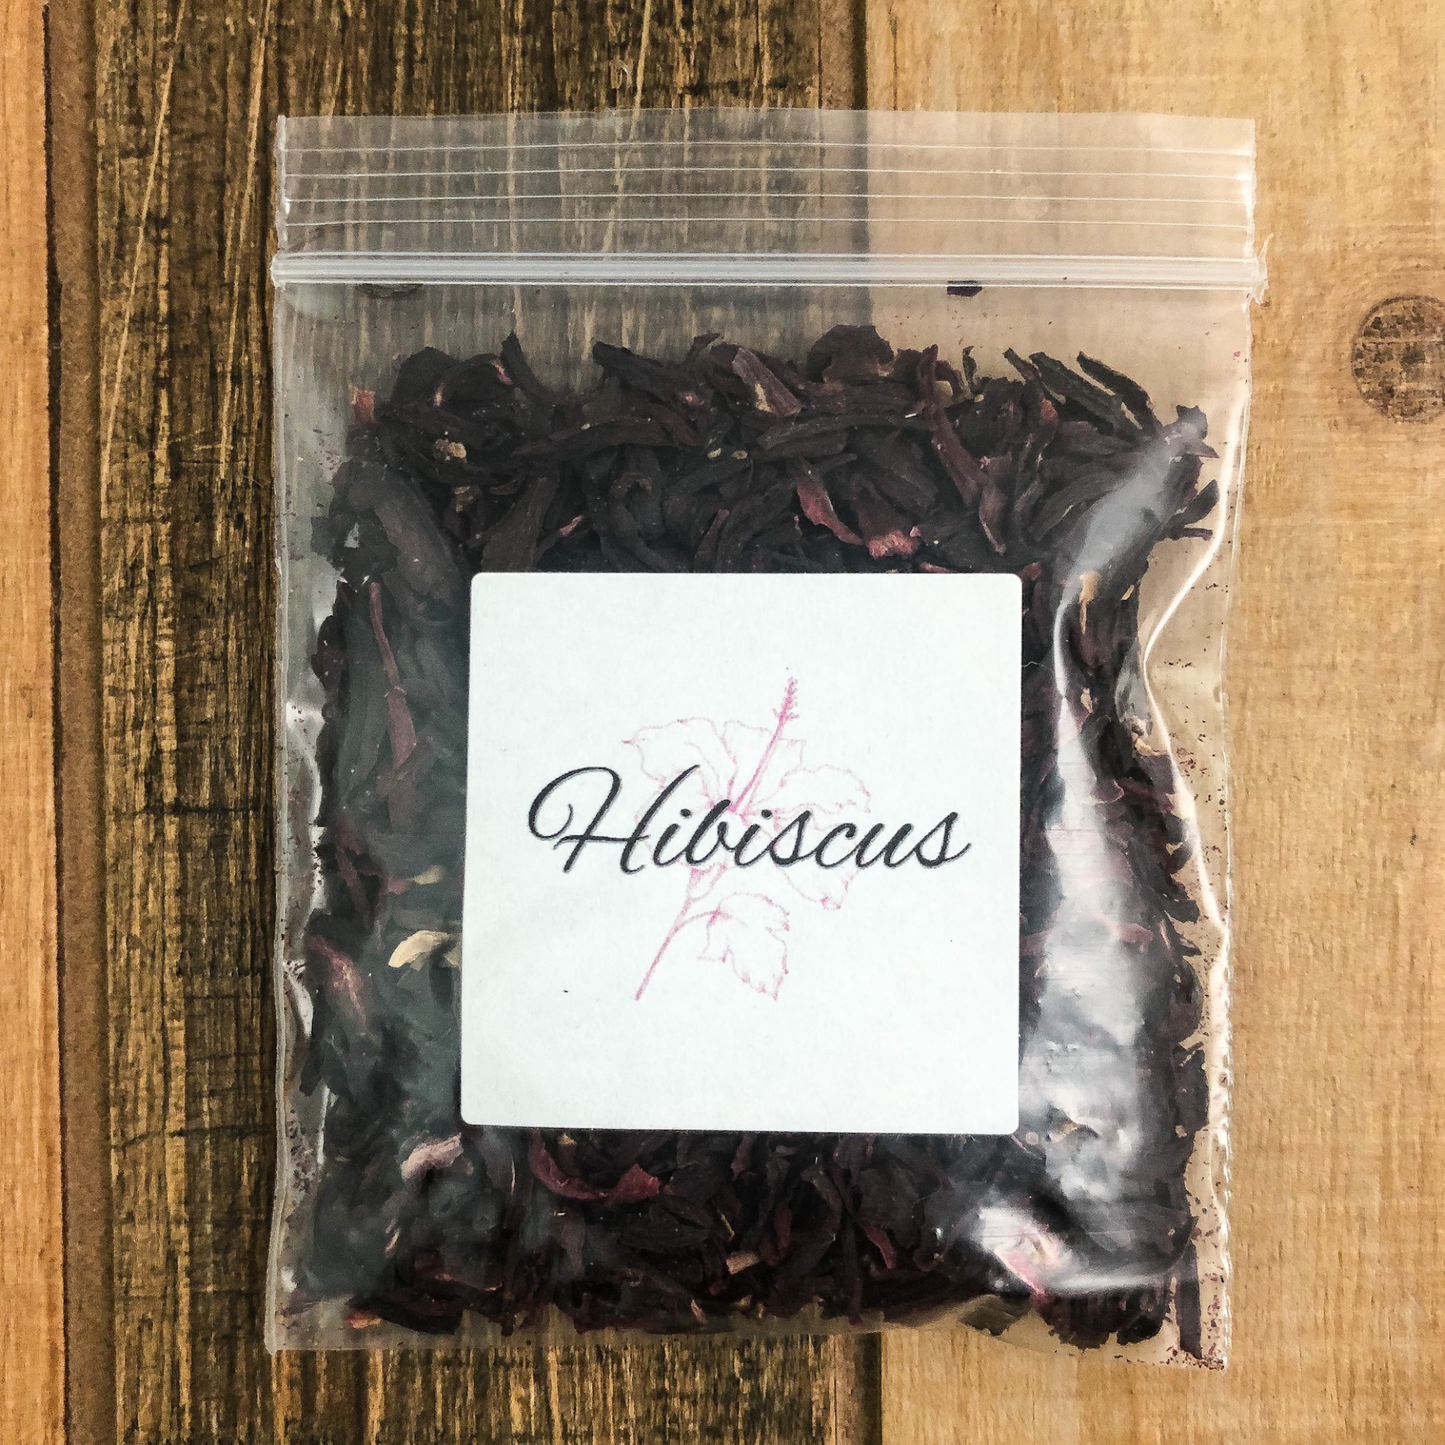 8g bag of dried hibiscus in a clear plastic bag with a wooden background